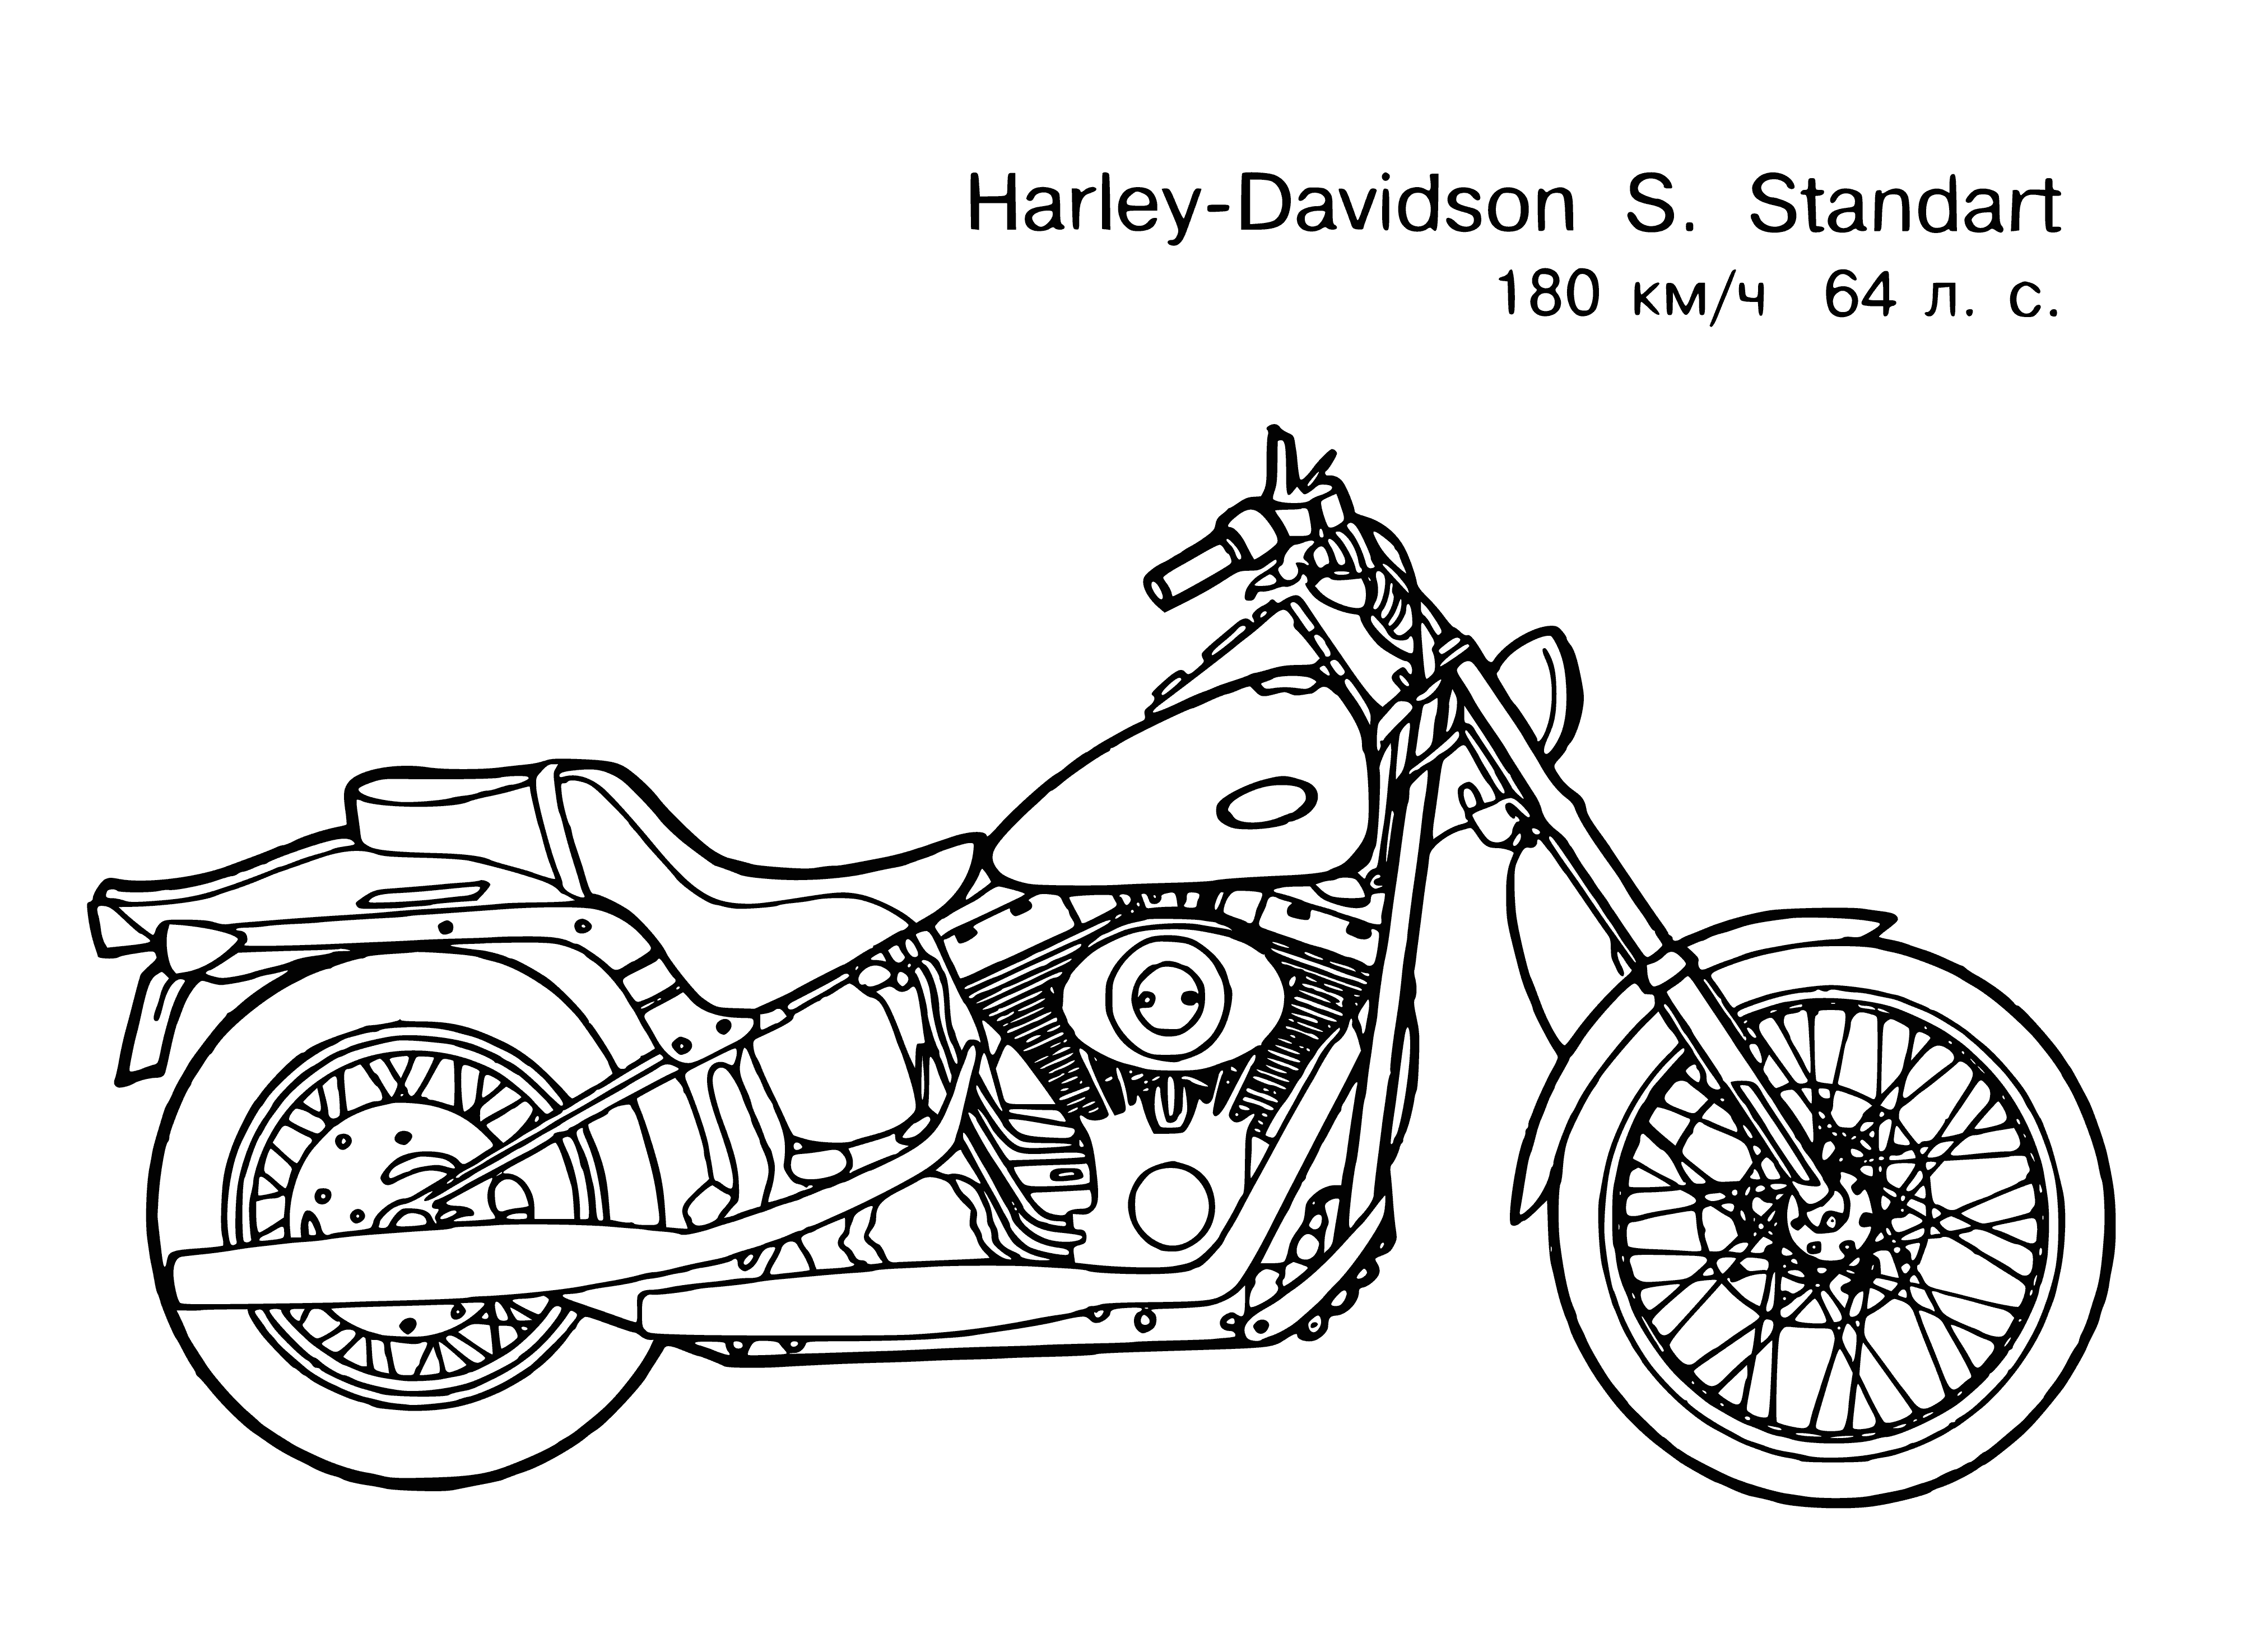 coloring page: 3 motorcycles in varying colors - blue, red, and yellow - are parked in a row in a coloring page.